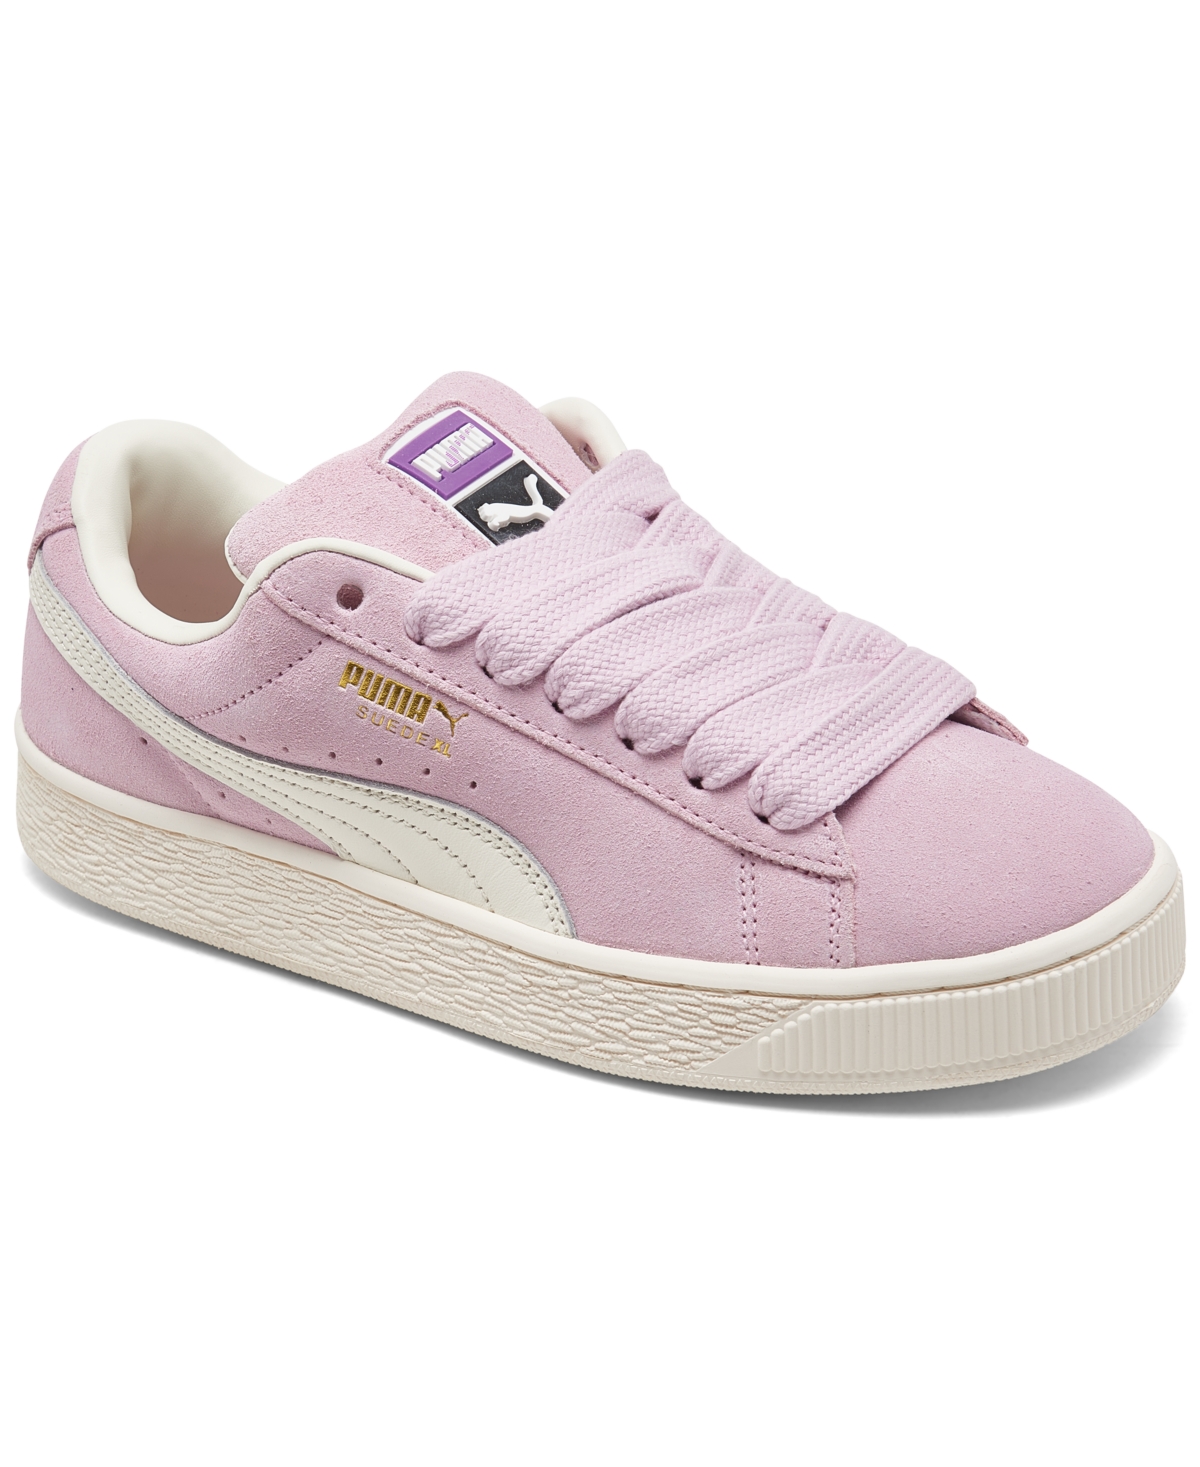 Women's Suede Xl Casual Sneakers from Finish Line - Purple